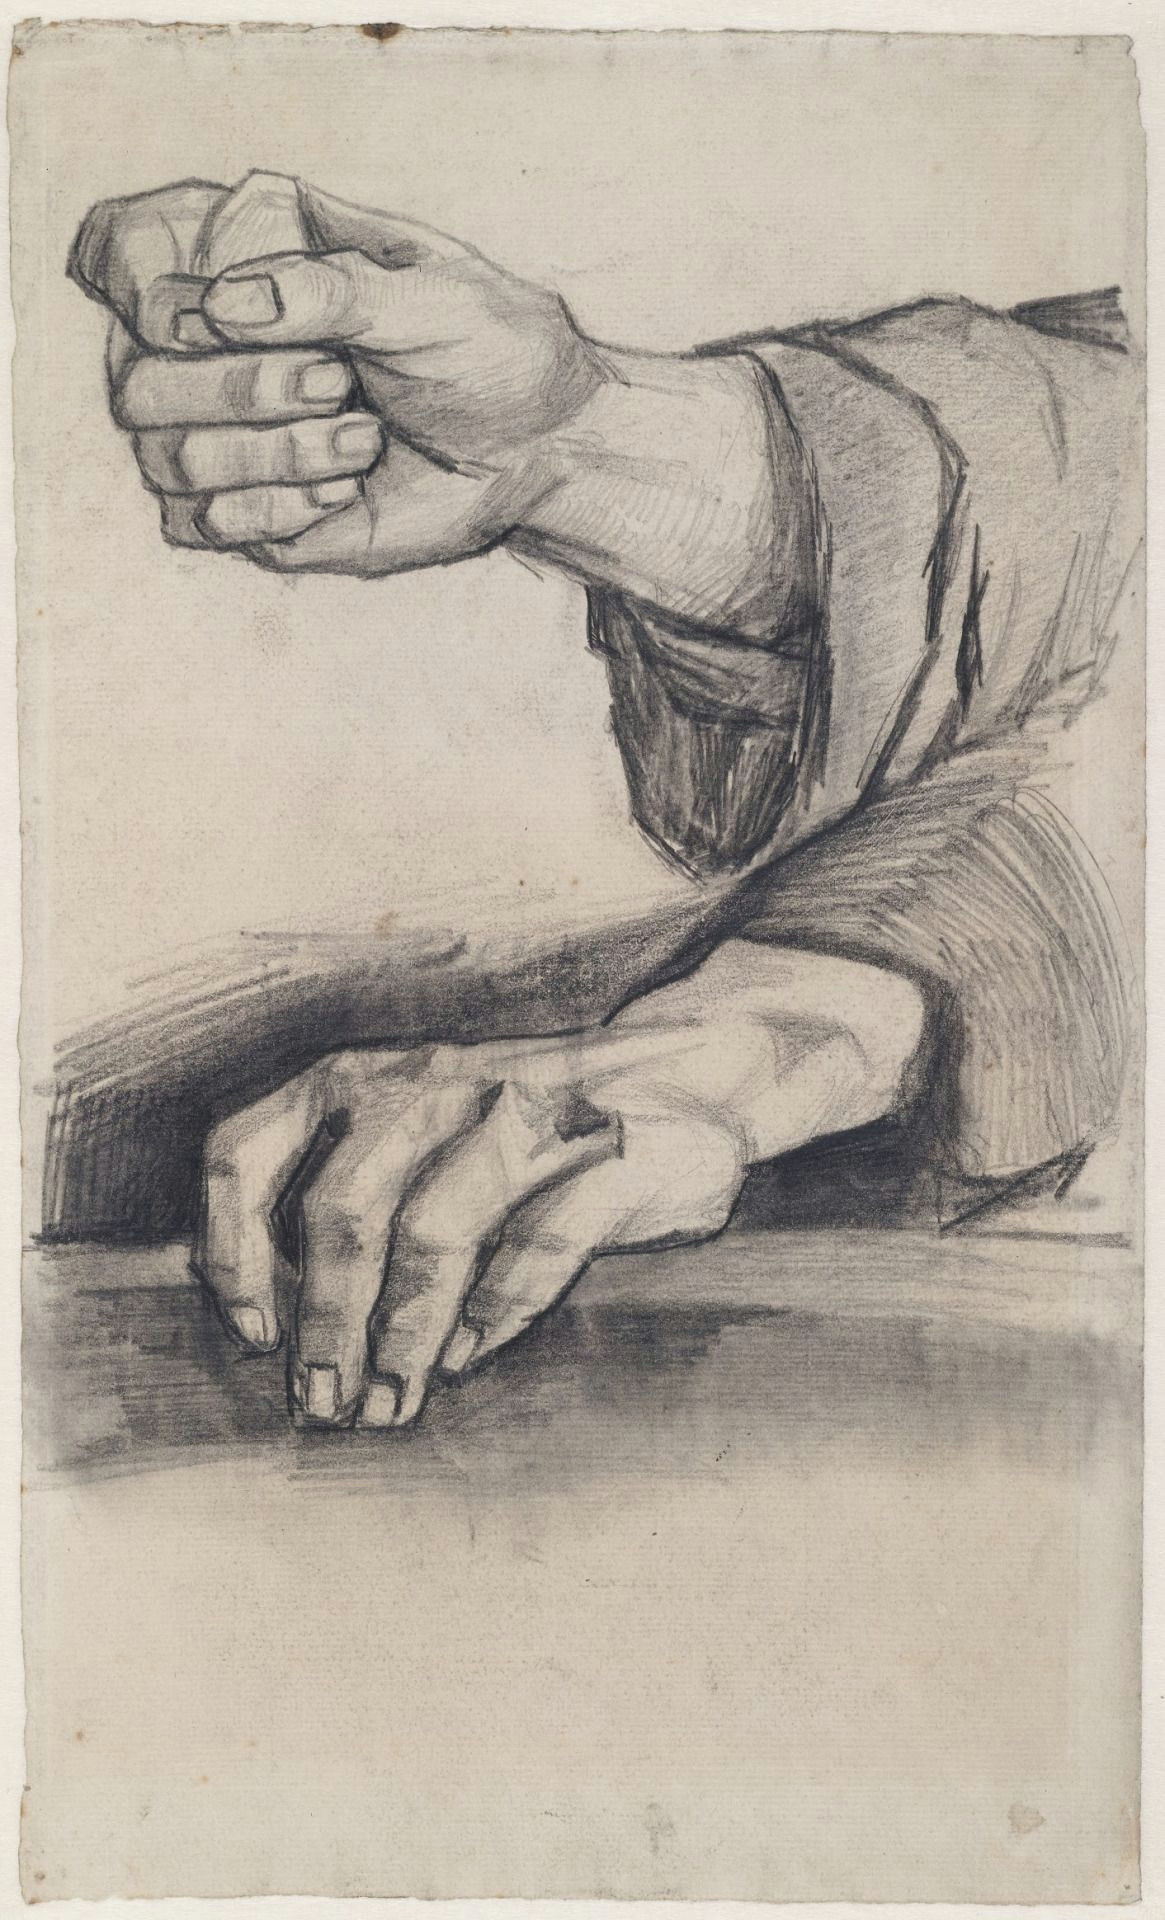 Drawings Of Two Hands Hands Vincent Van Gogh Van Gogh and Other Manics Pinterest